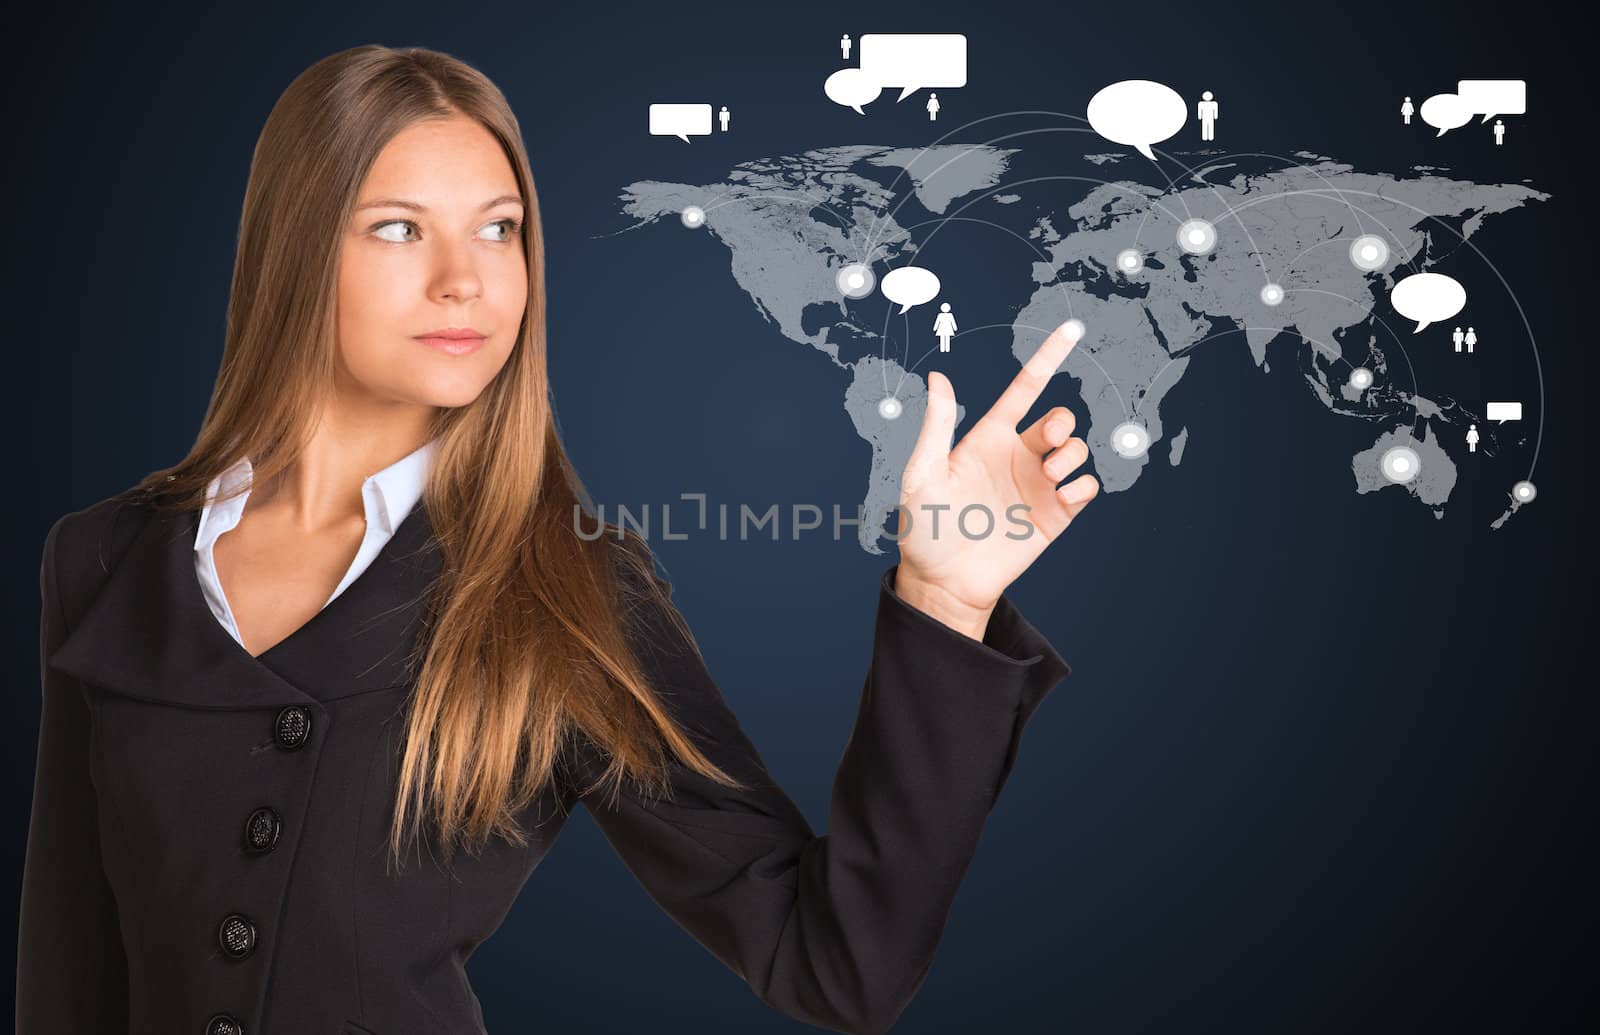 Businesswoman in a suit presses the virtual world map with contacts. The concept of global contacts